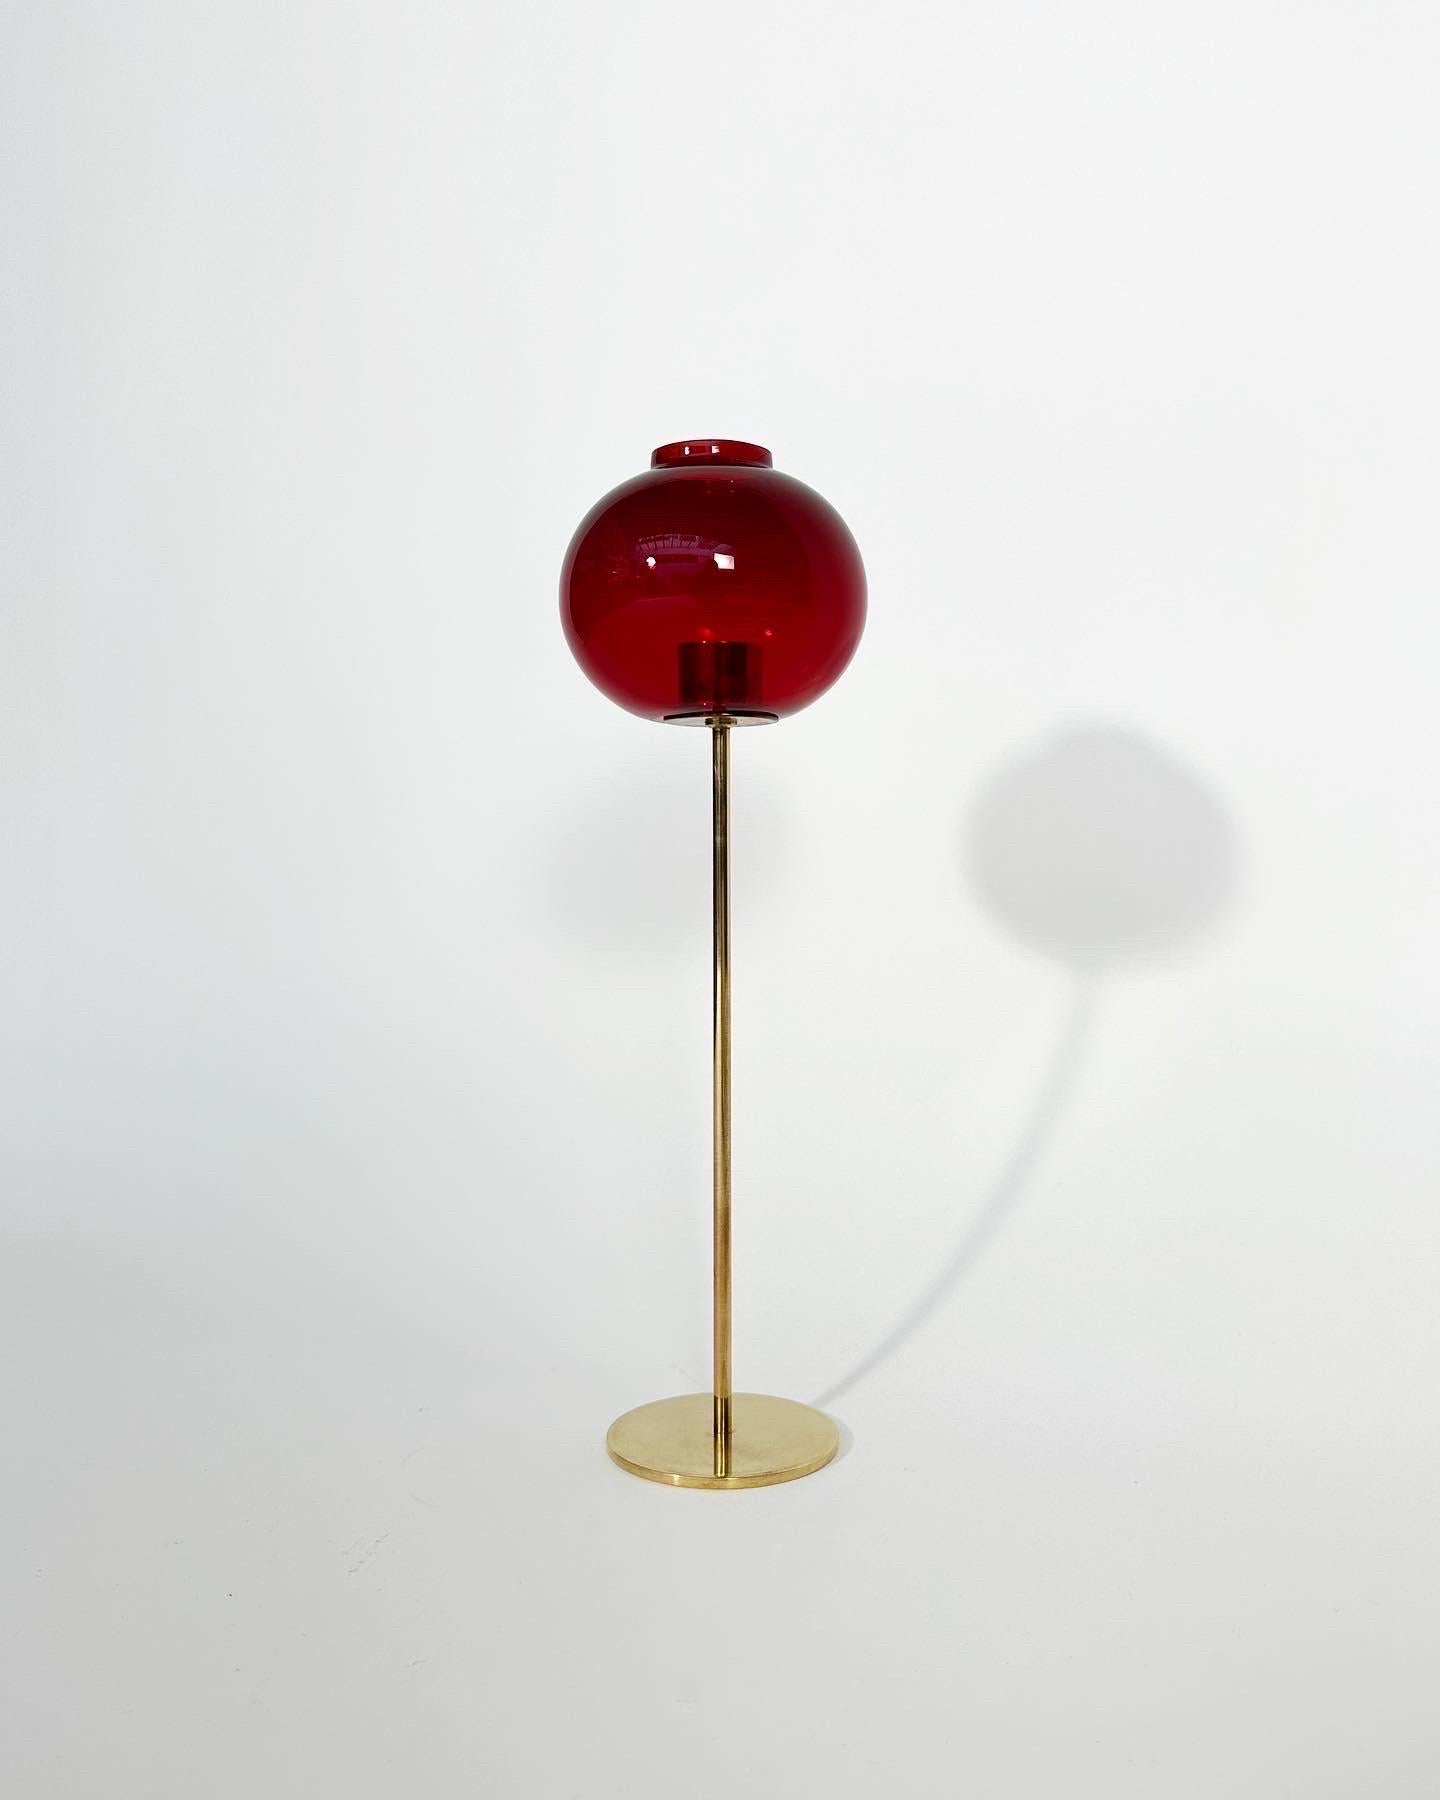 A rare tall Hans-Agne Jakobsson candle light, model L24, designed in 1959, made of solid brass with a hand-formed glass shade in dark red, manufactured by Hans-Agne Jakobsson AB in Markaryd, Sweden in the 1960s.

Height: 42 cm
Diameter: 13 cm

Very